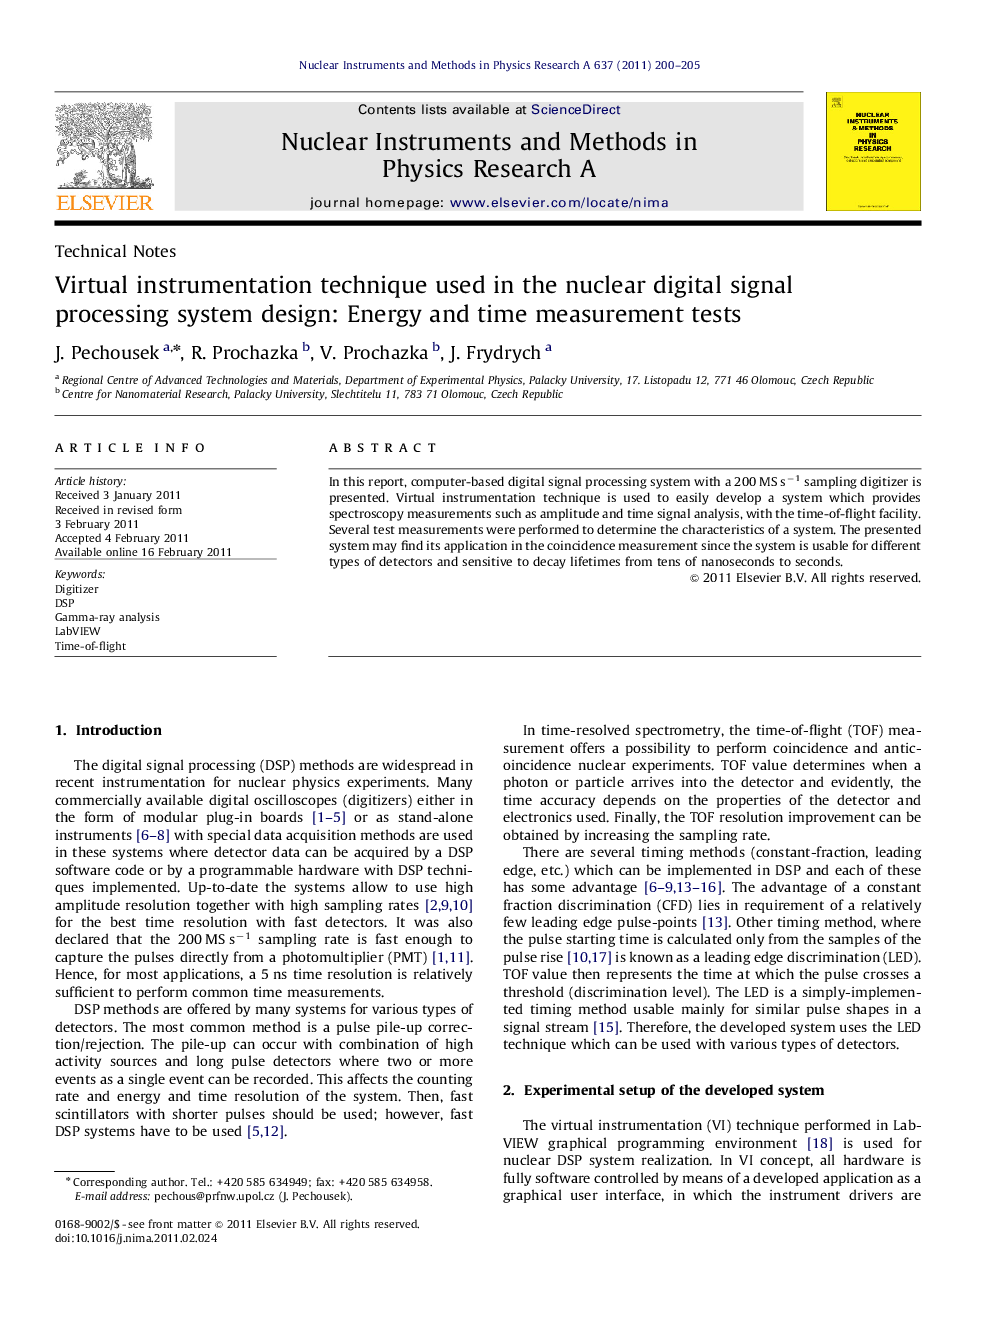 Virtual instrumentation technique used in the nuclear digital signal processing system design: Energy and time measurement tests